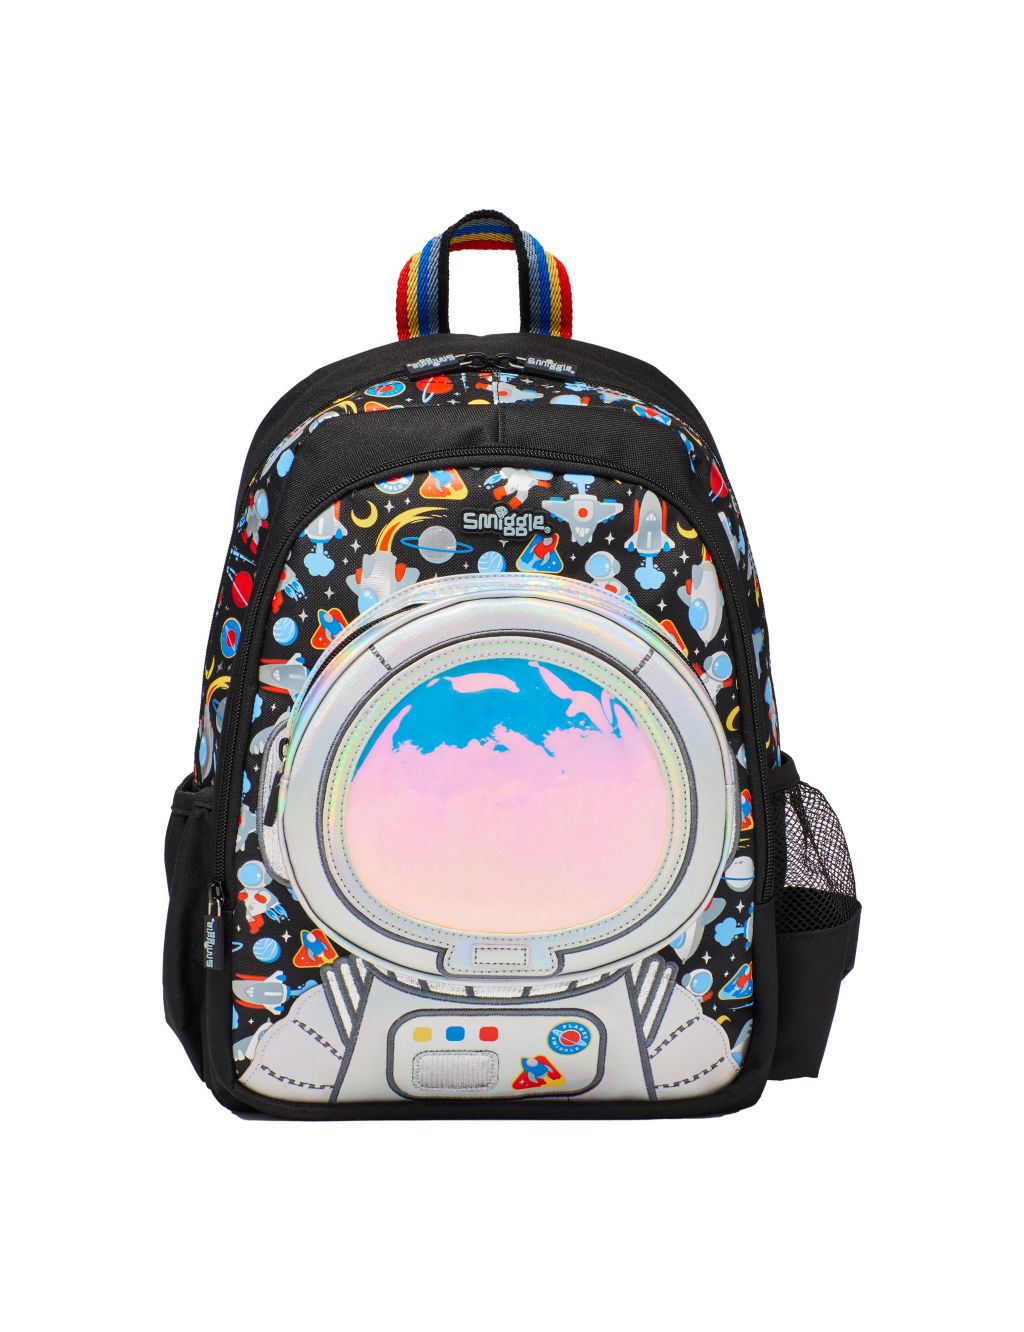 Kids' Space Backpack (3+ Yrs) image 1